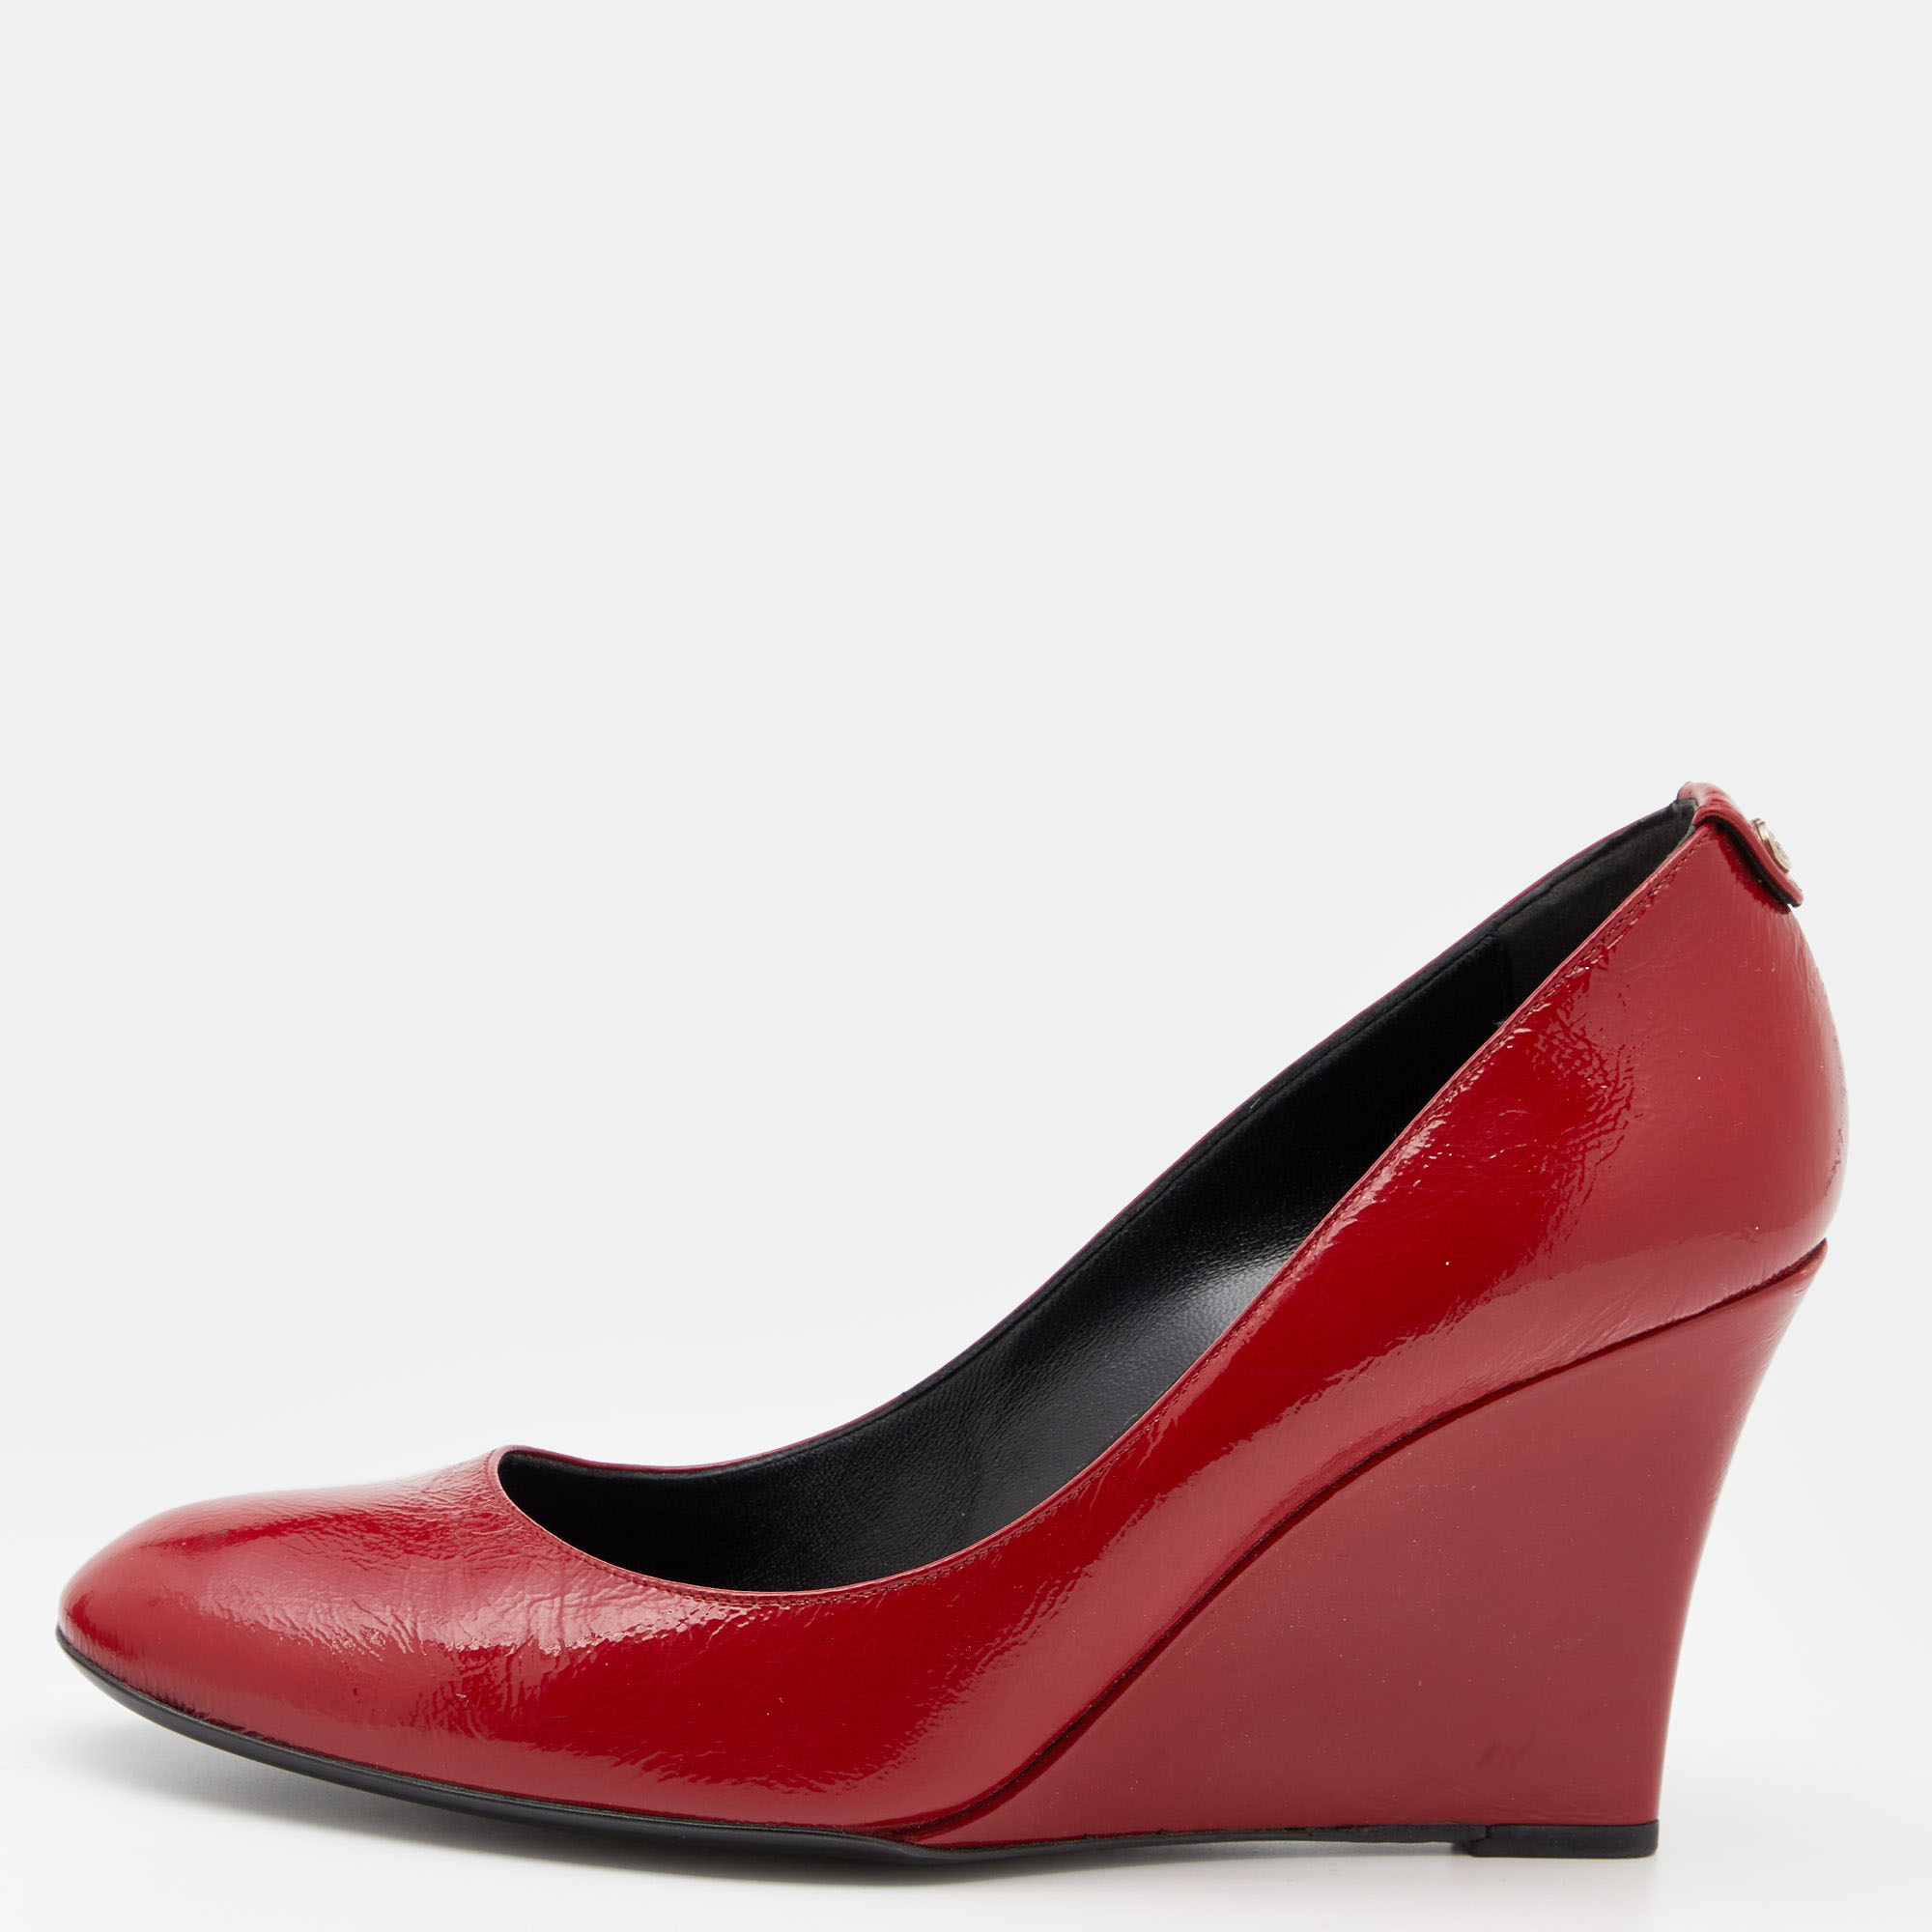 

Gucci Red Patent Leather Wedge Round Toe Pumps Size